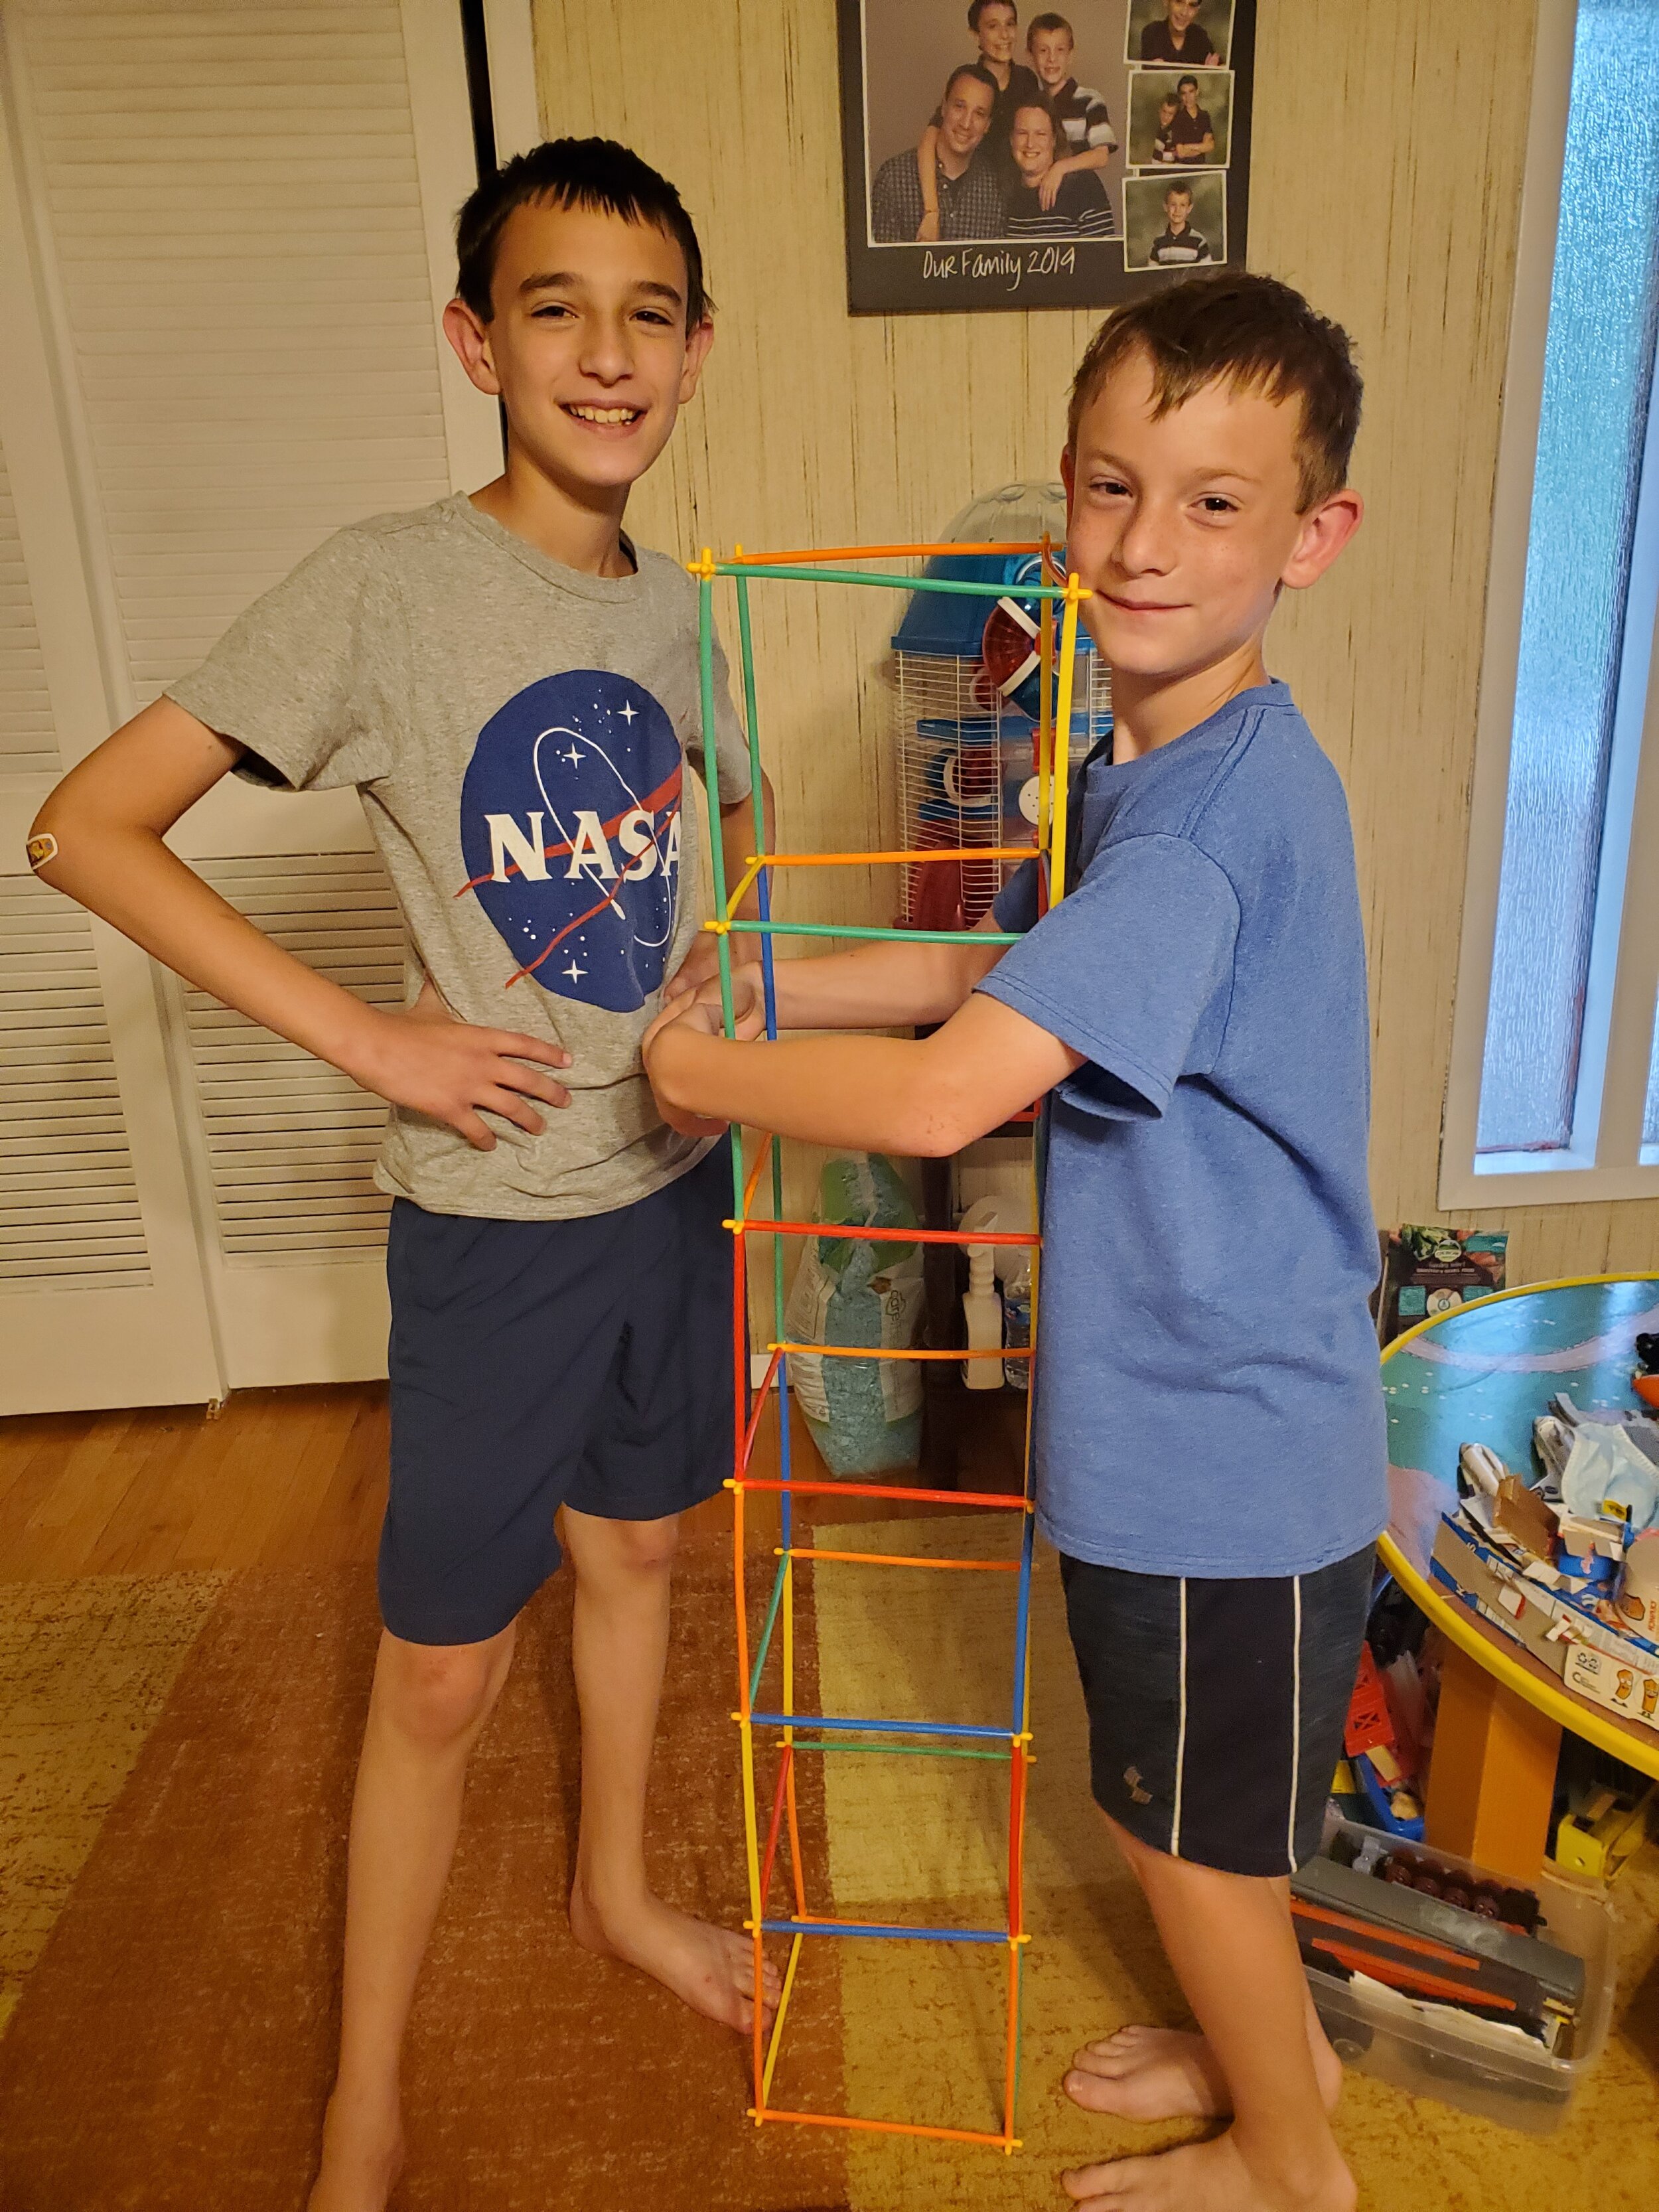 Seeing how tall a tower we can build ourselves.